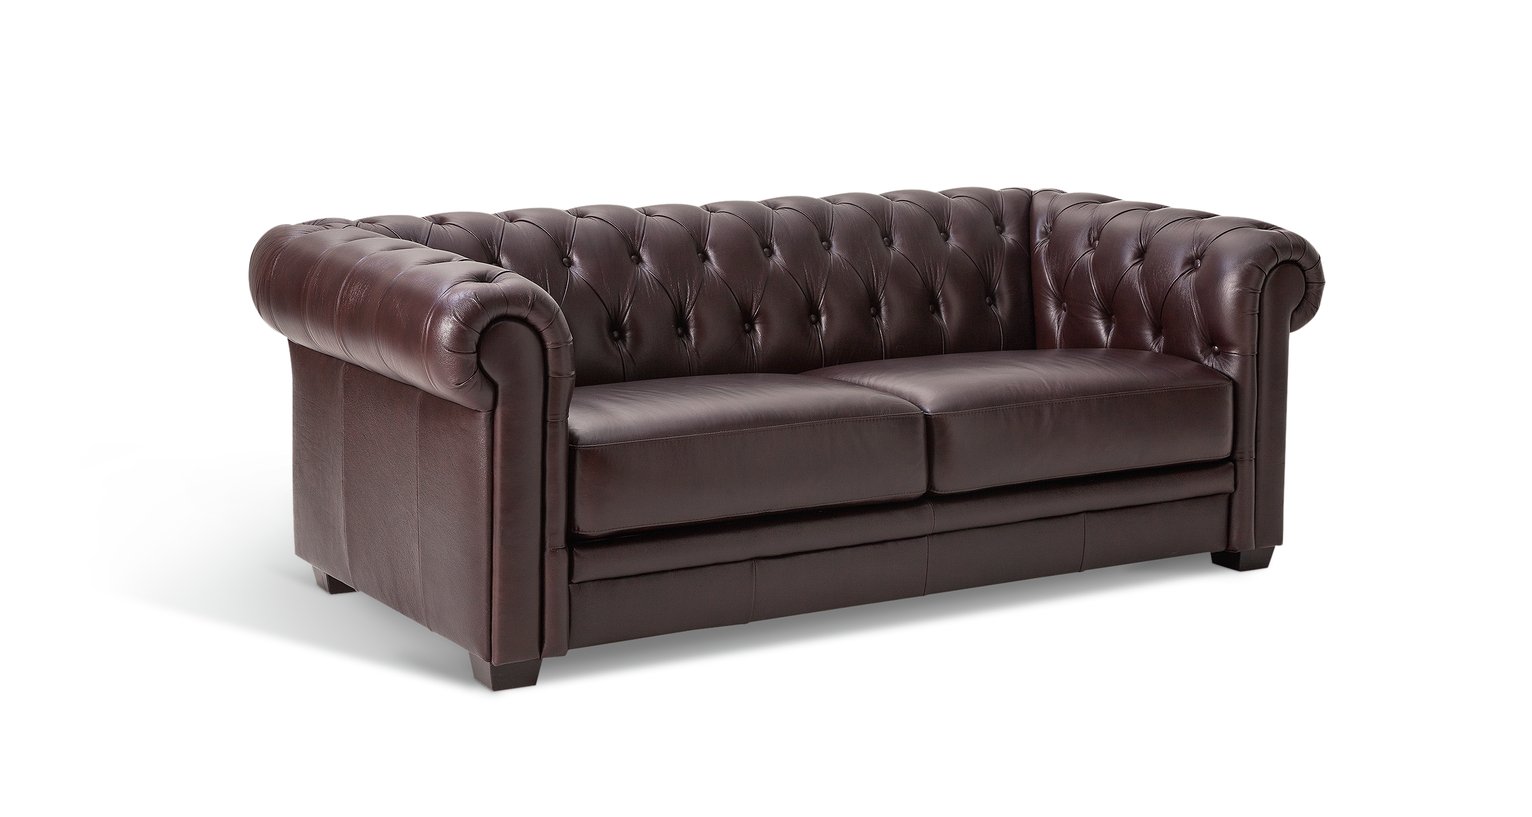 Argos Home Chesterfield 3 Seater Leather Sofa Review